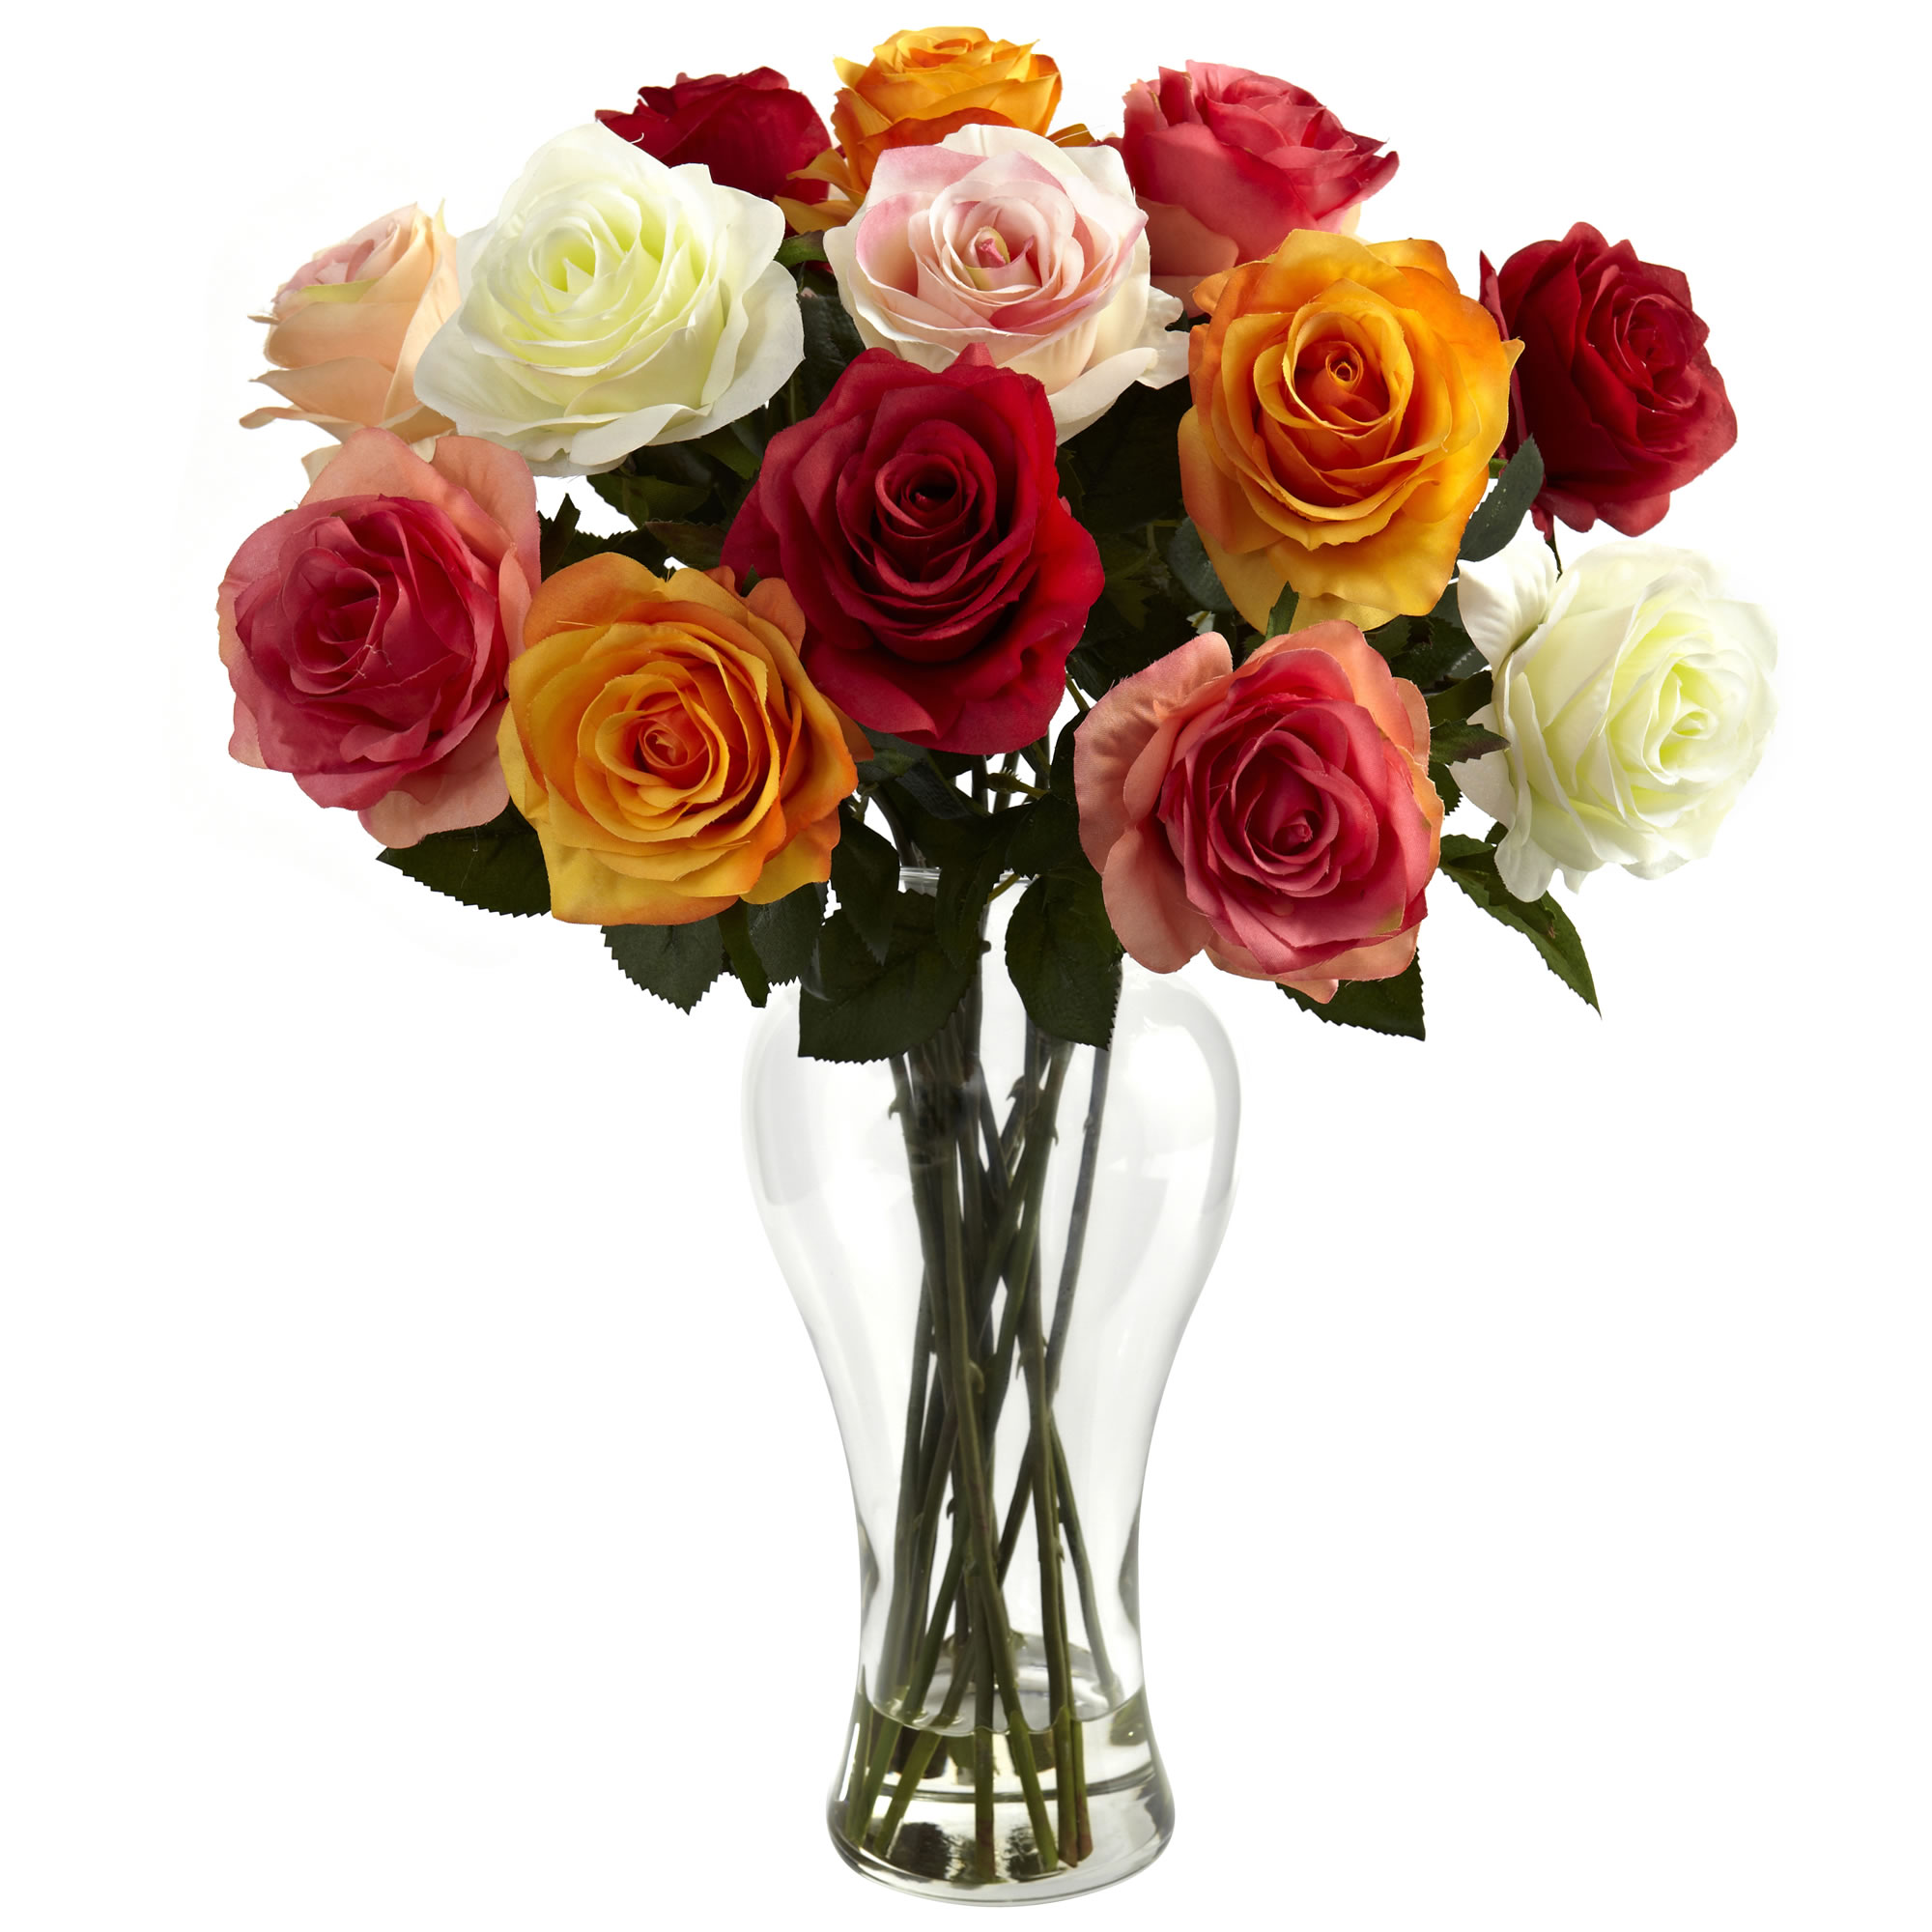 Assorted Blooming Roses With Vase